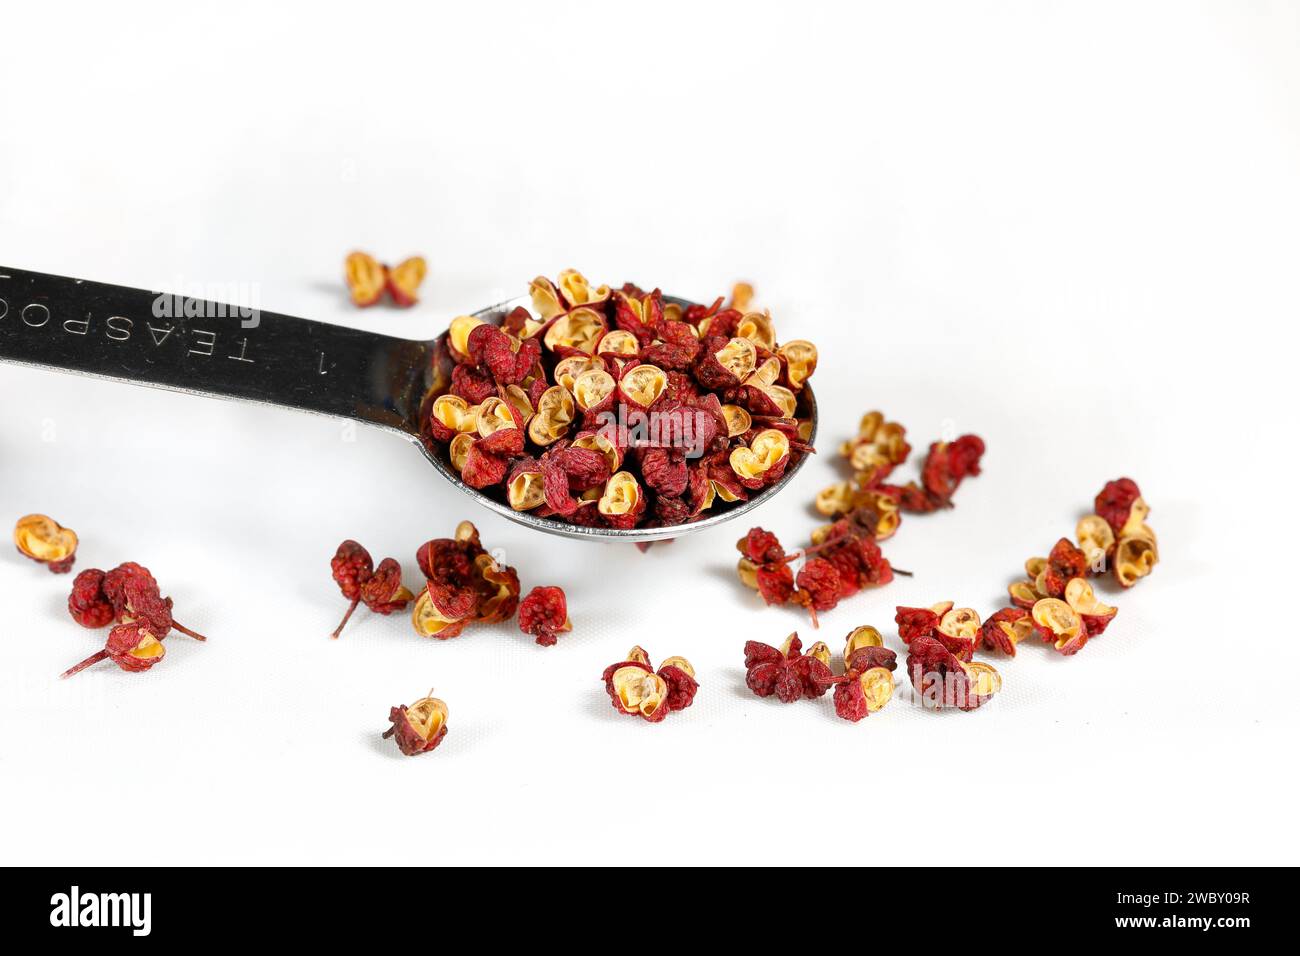 A teaspoon of dried Da Hong Pao Sichuan Peppercorns (Zanthoxylum bungeanum) 大紅袍 花椒 prickly ash berries isolated on a white background. Stock Photo